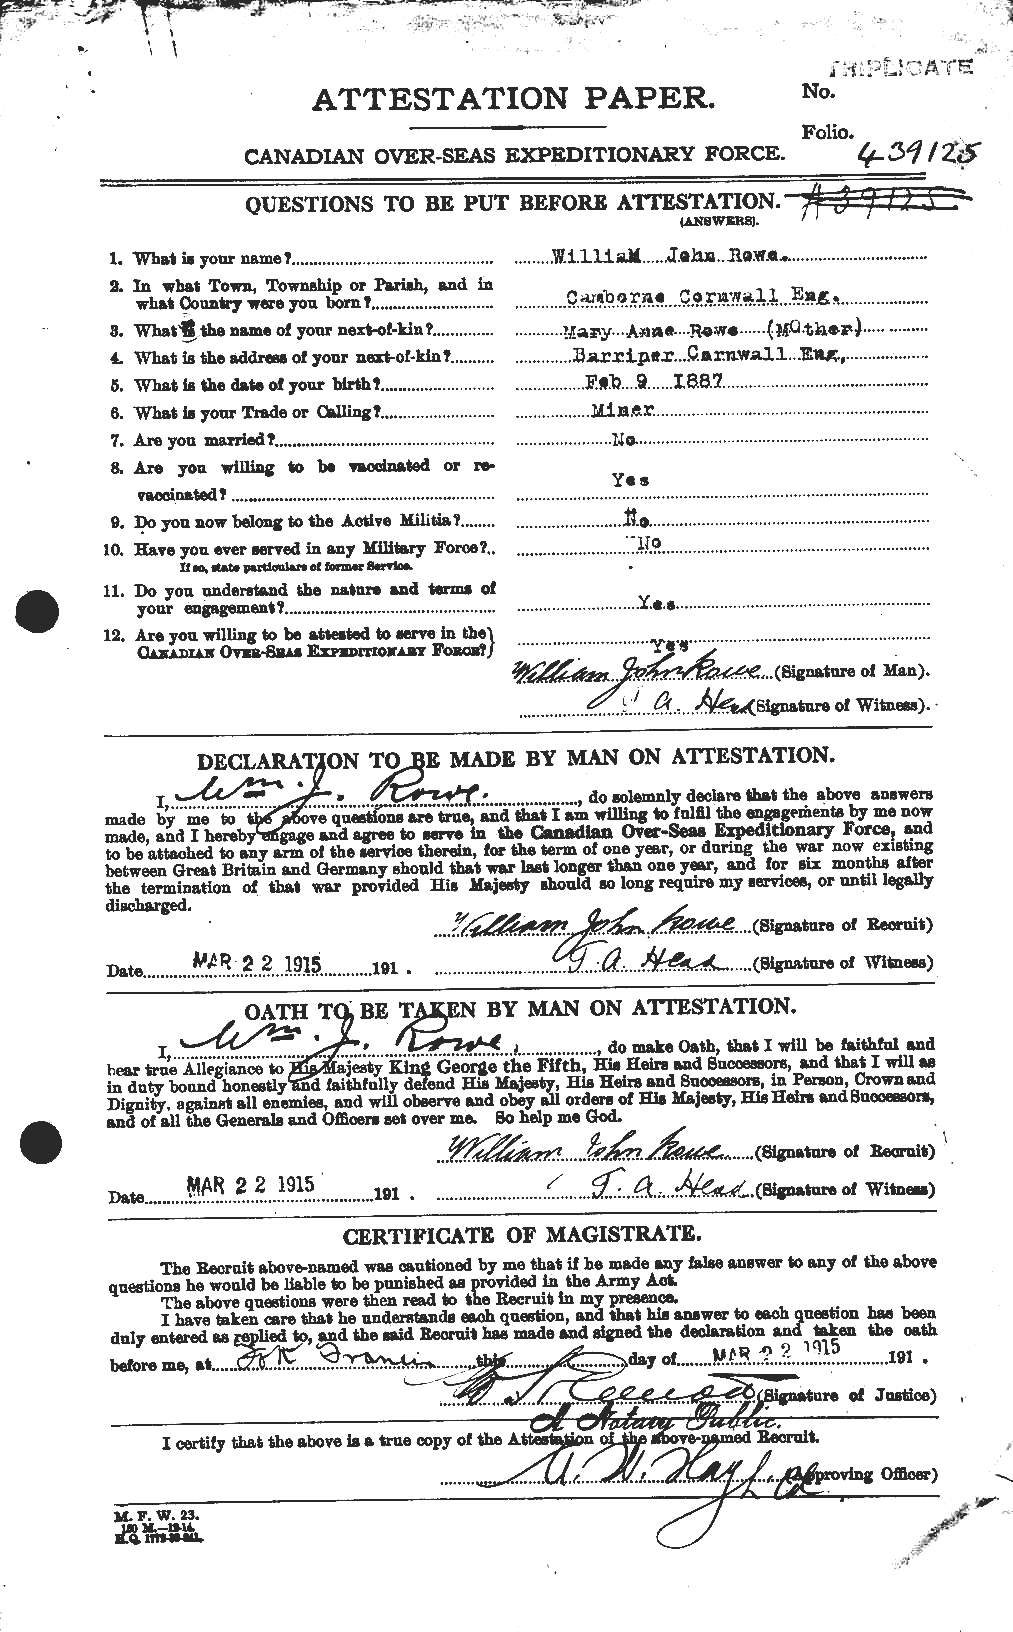 Personnel Records of the First World War - CEF 616035a